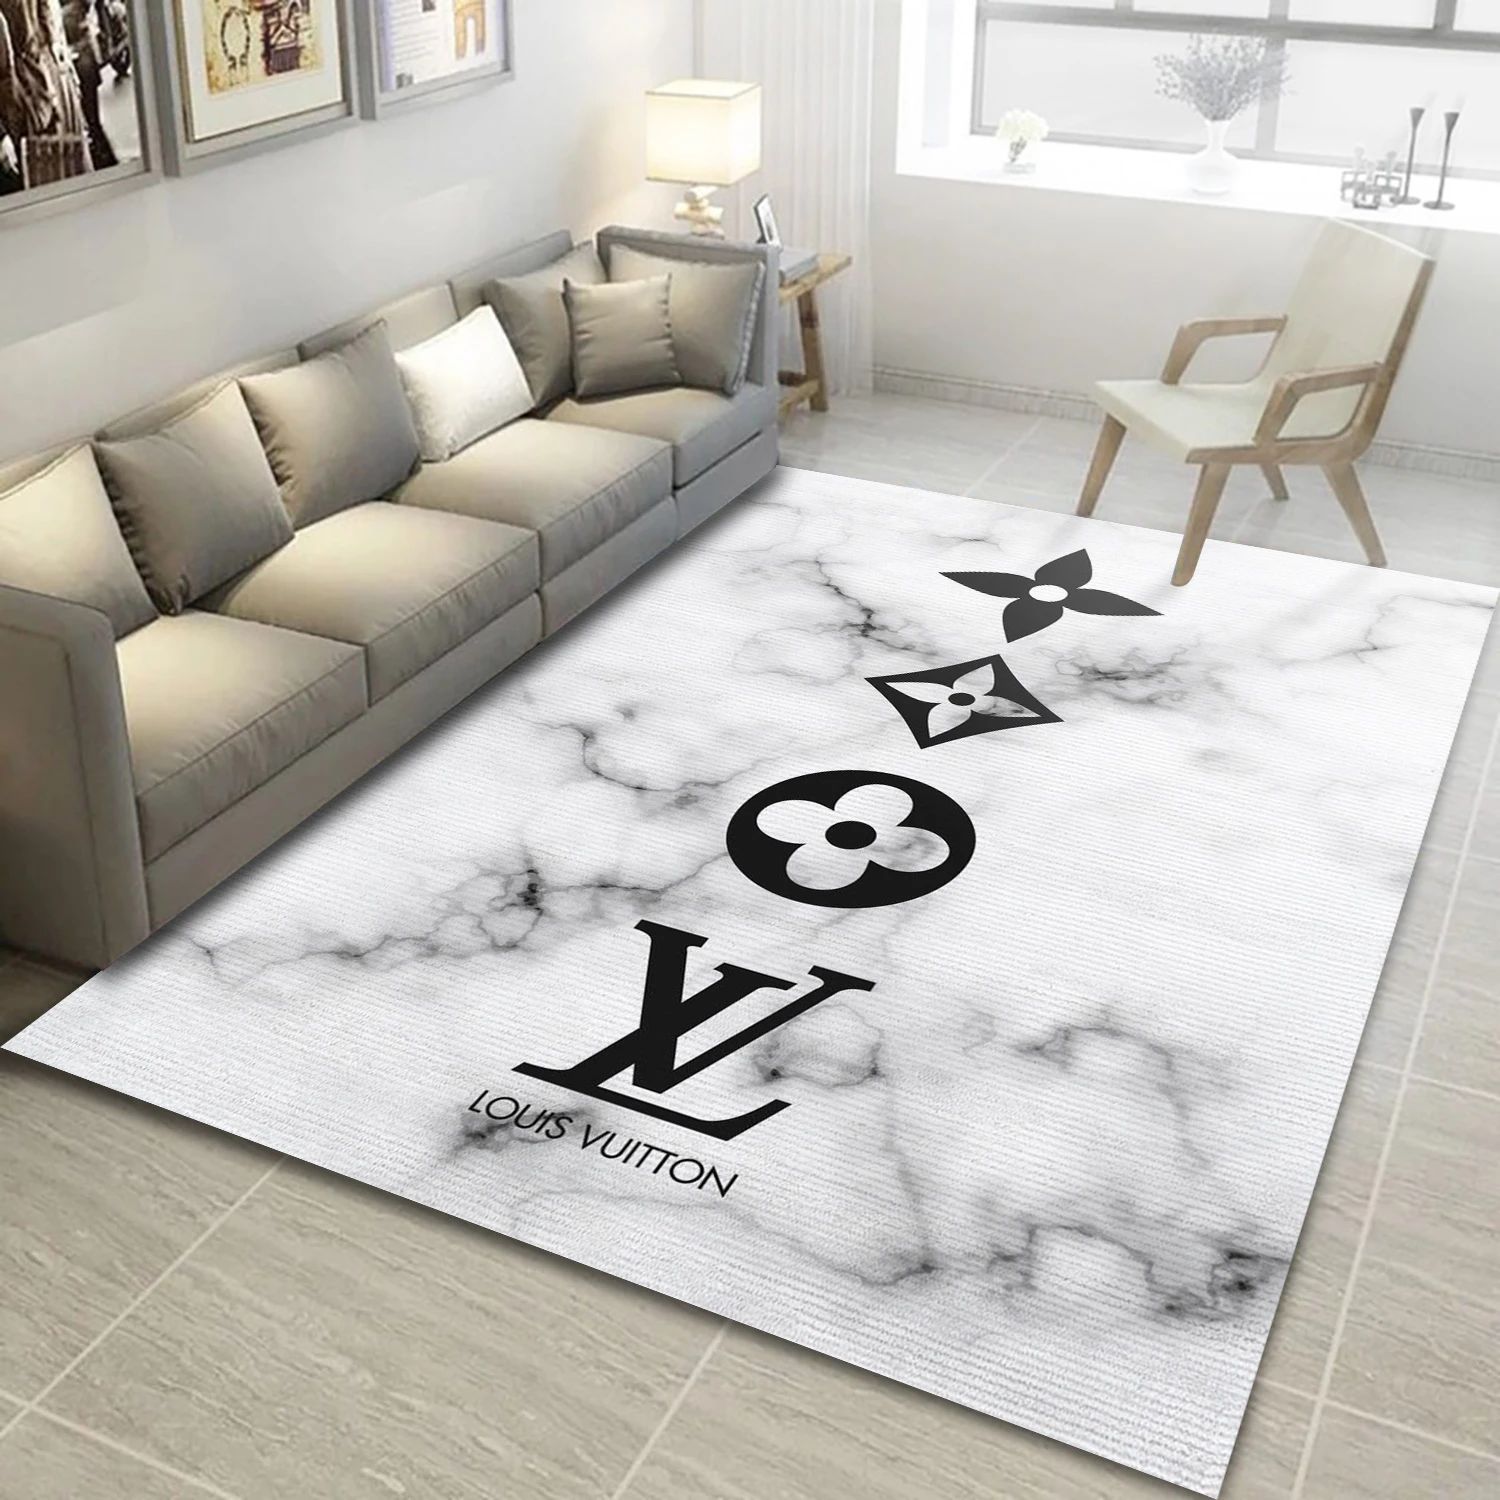 Louis Vuitton Fashion Brand Area Rug, Bedroom Rug - Family US Decor - Indoor Outdoor Rugs